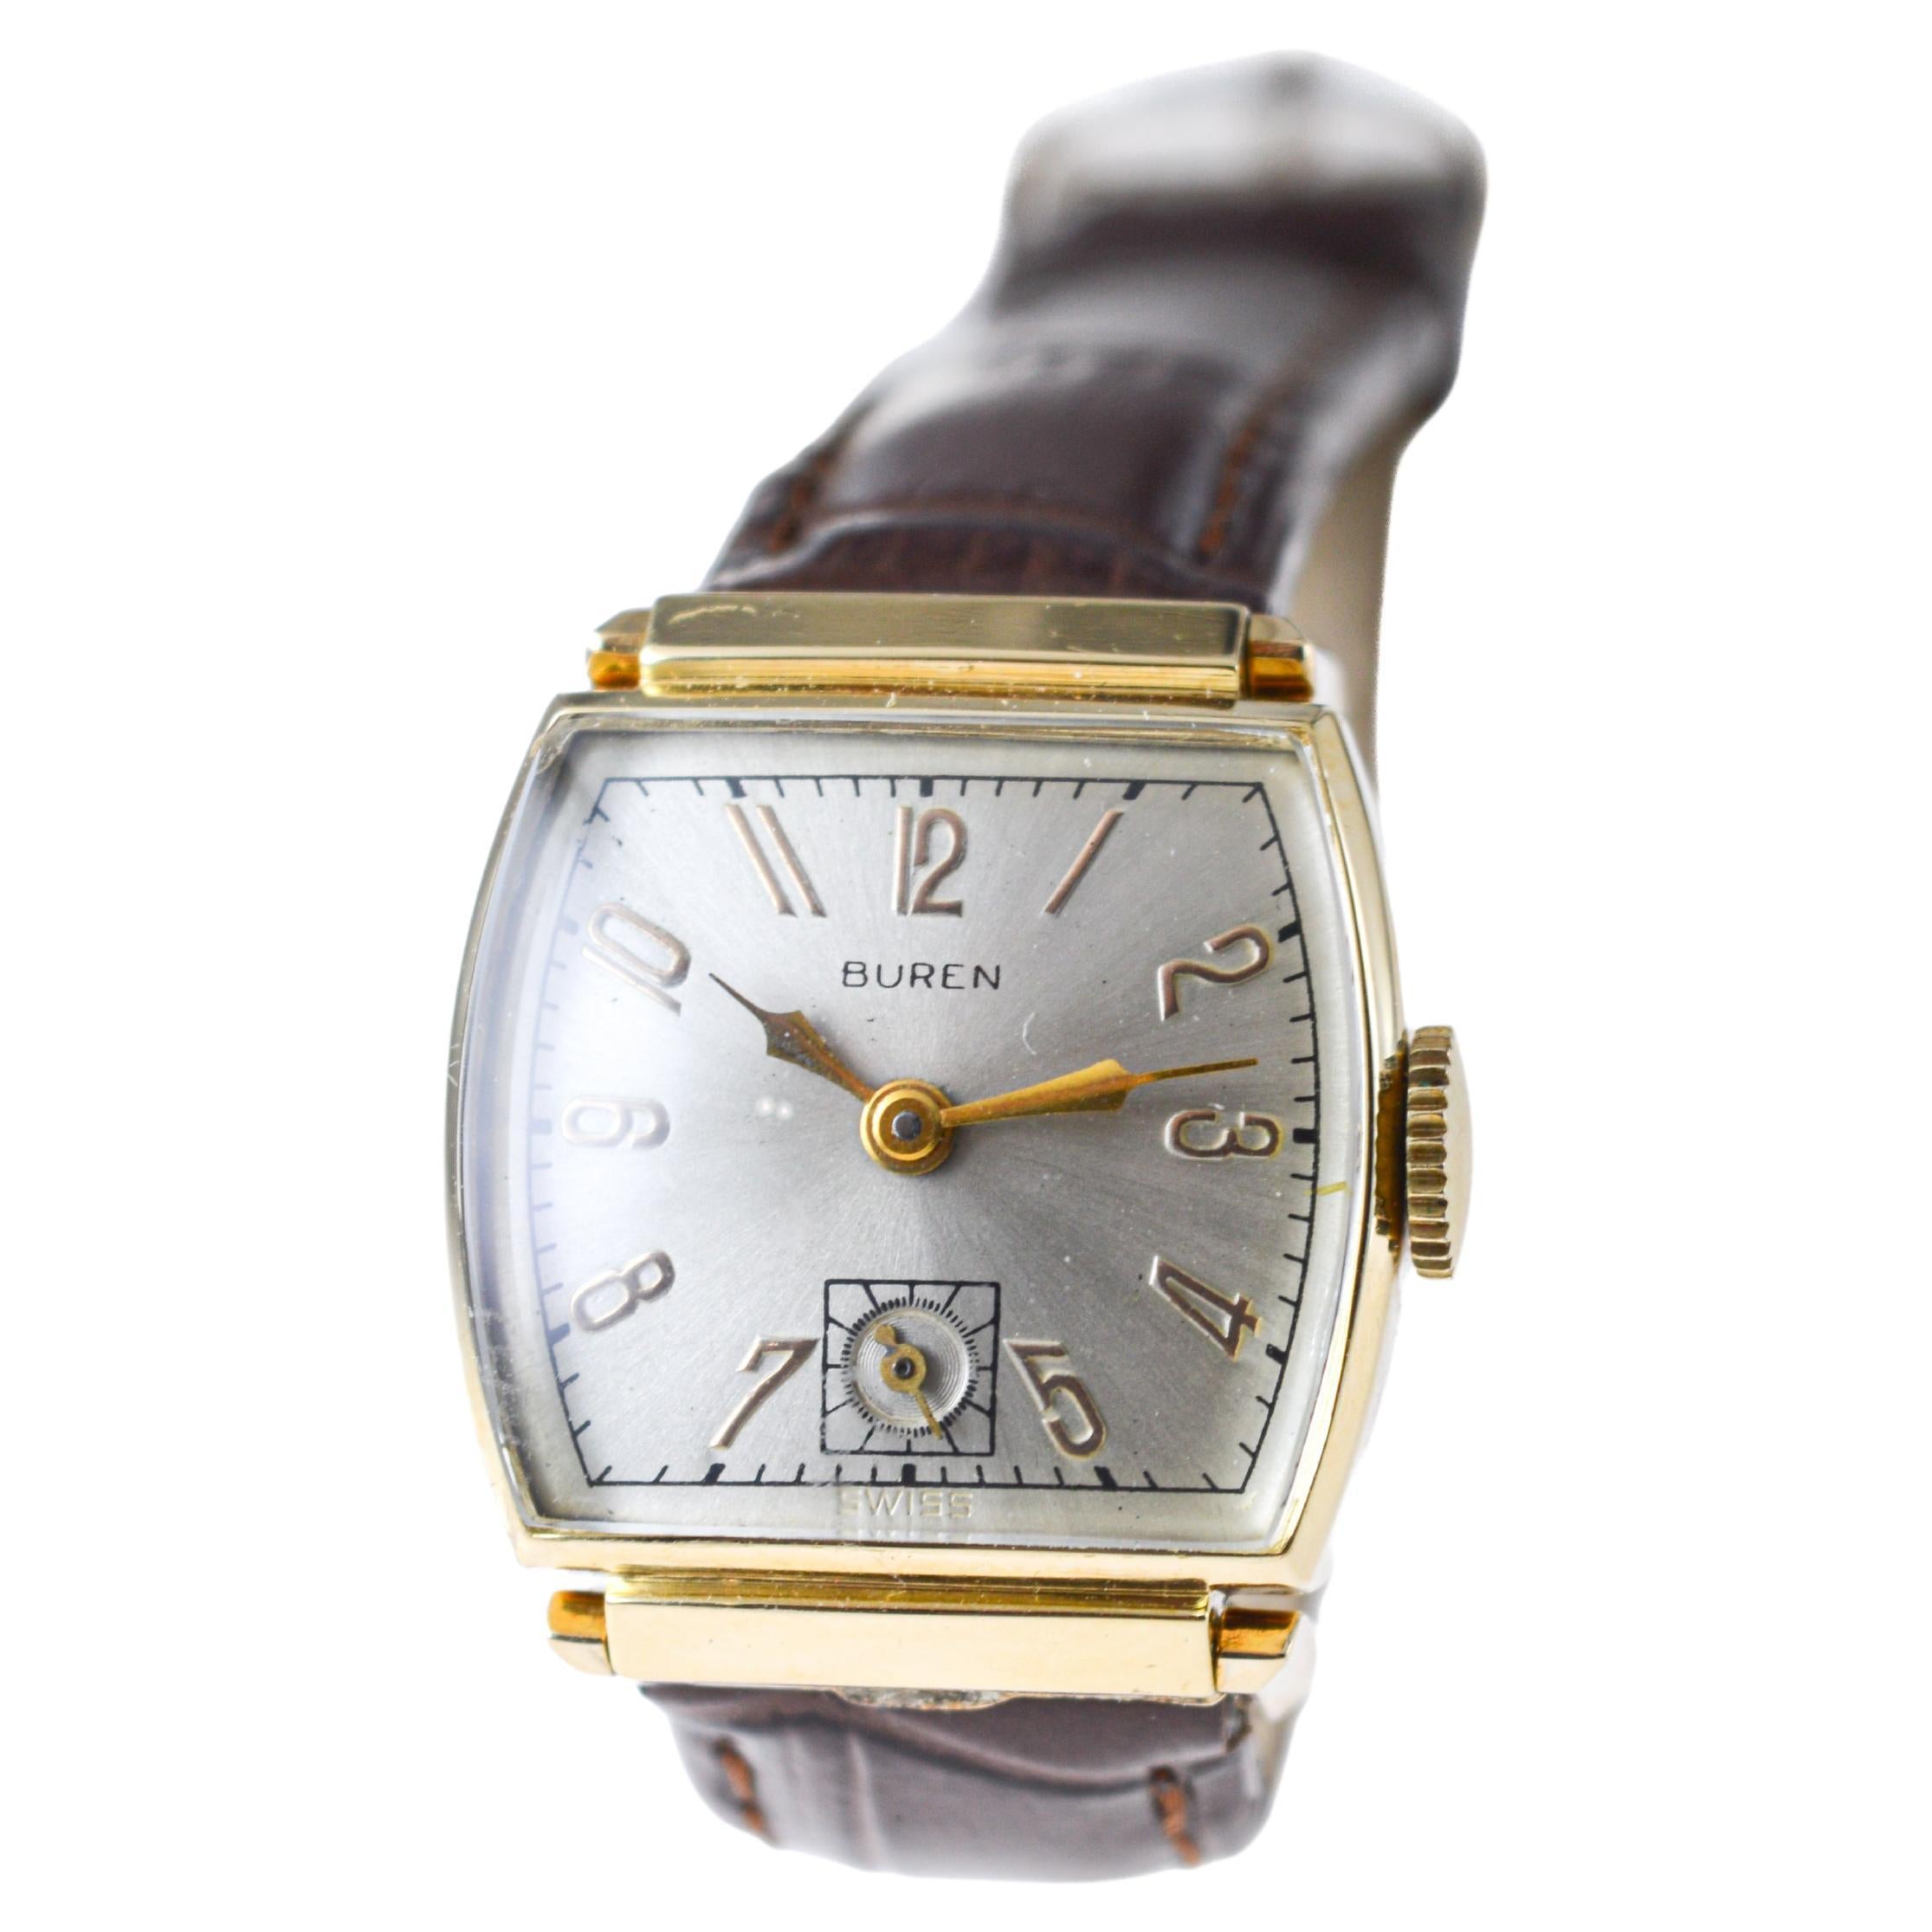 Buren Gold Filled Art Deco Watch with Articulated Lugs From the 1940's For Sale 1